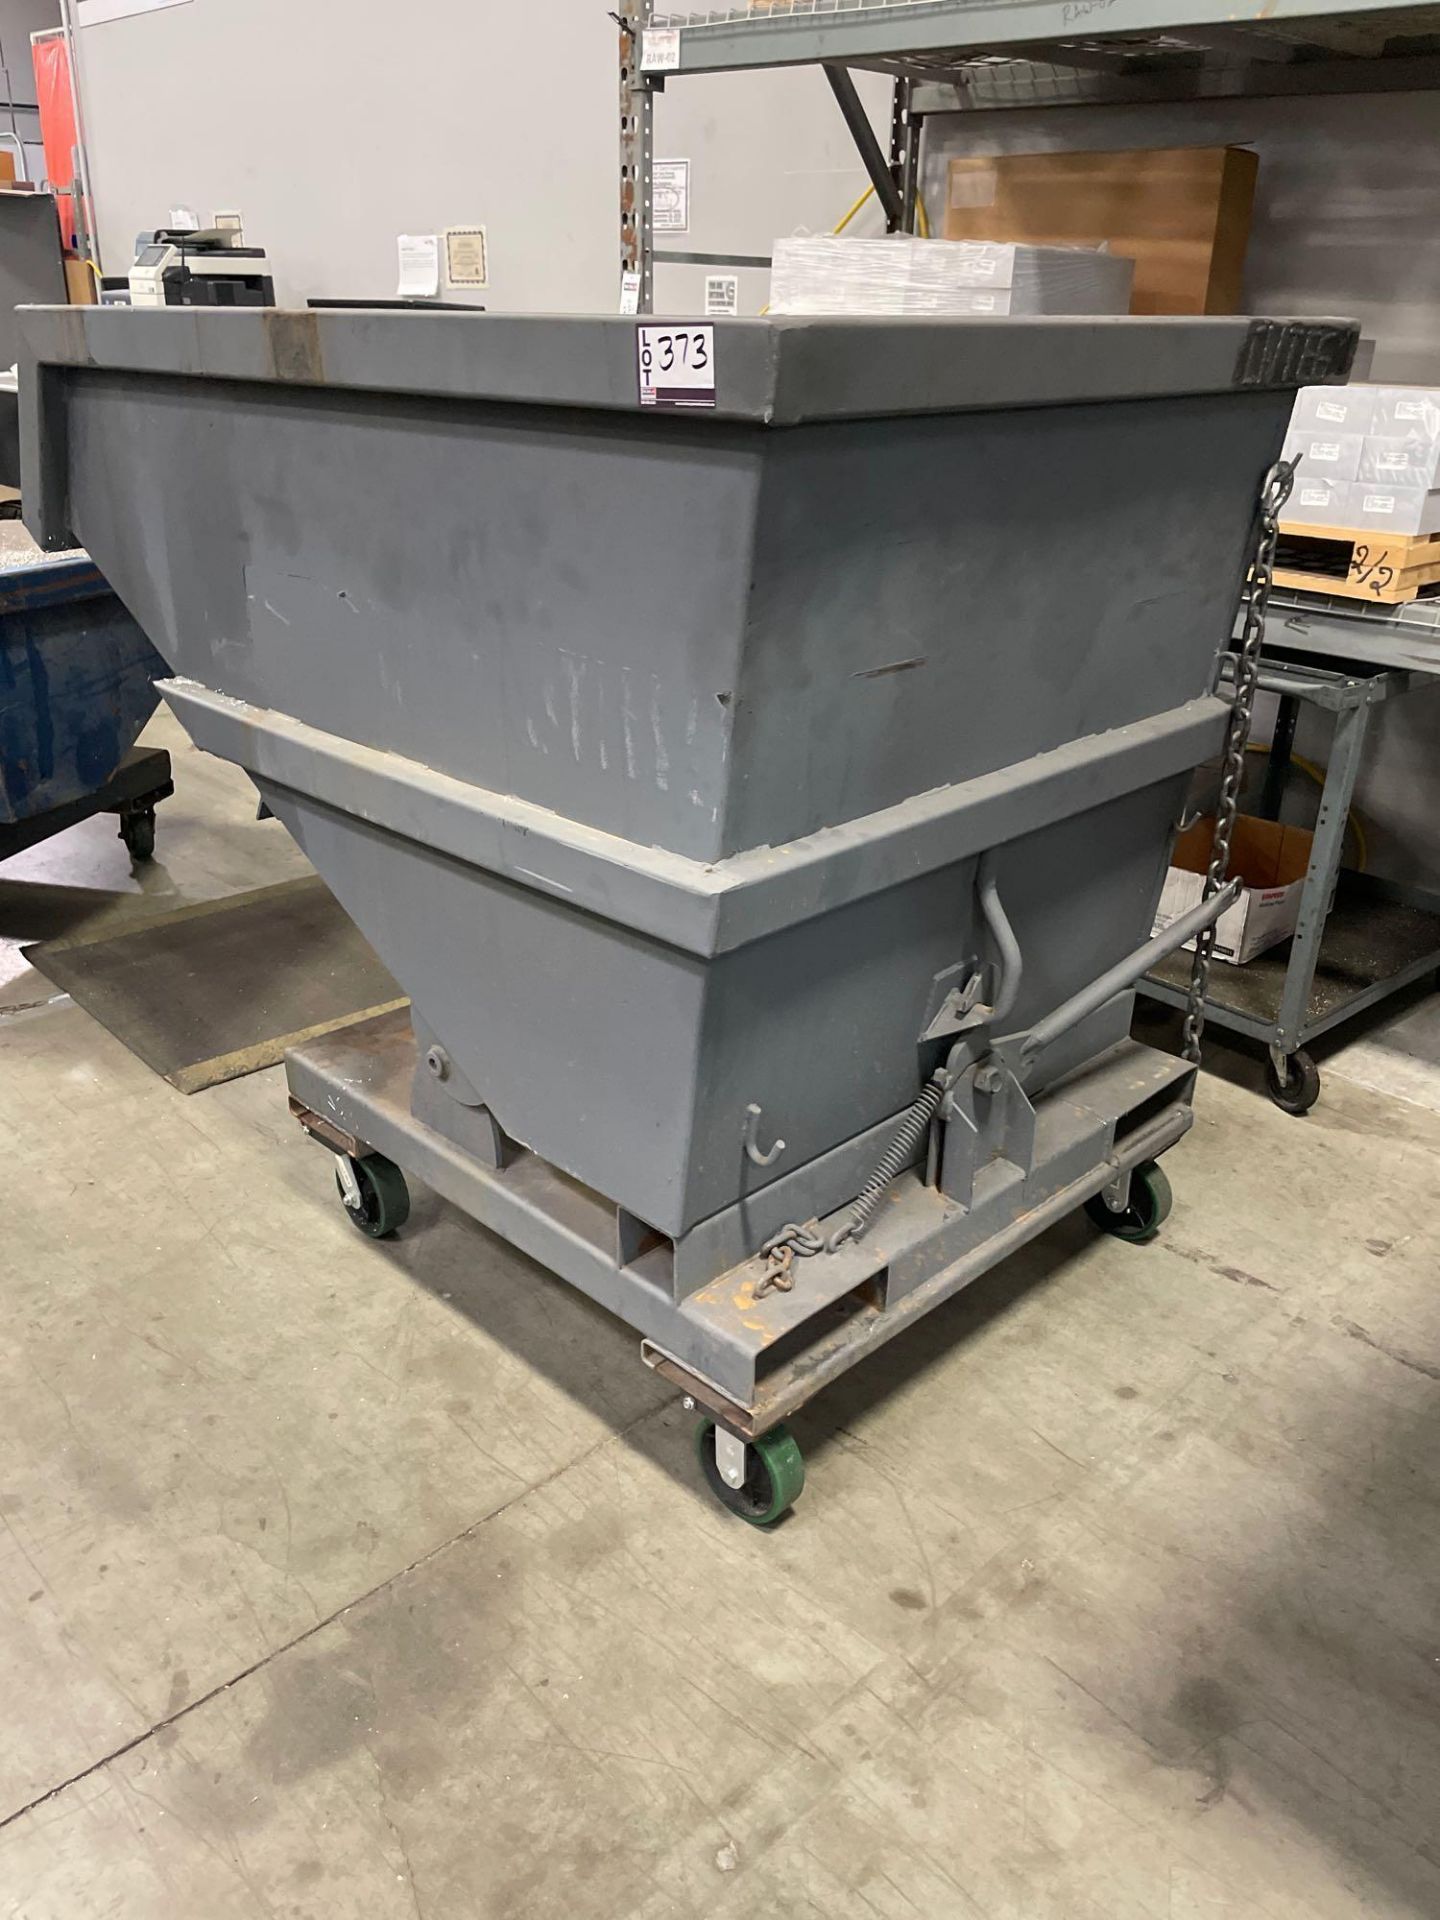 42" x 64" x 40" Dumping Hopper on Casters - Image 2 of 5